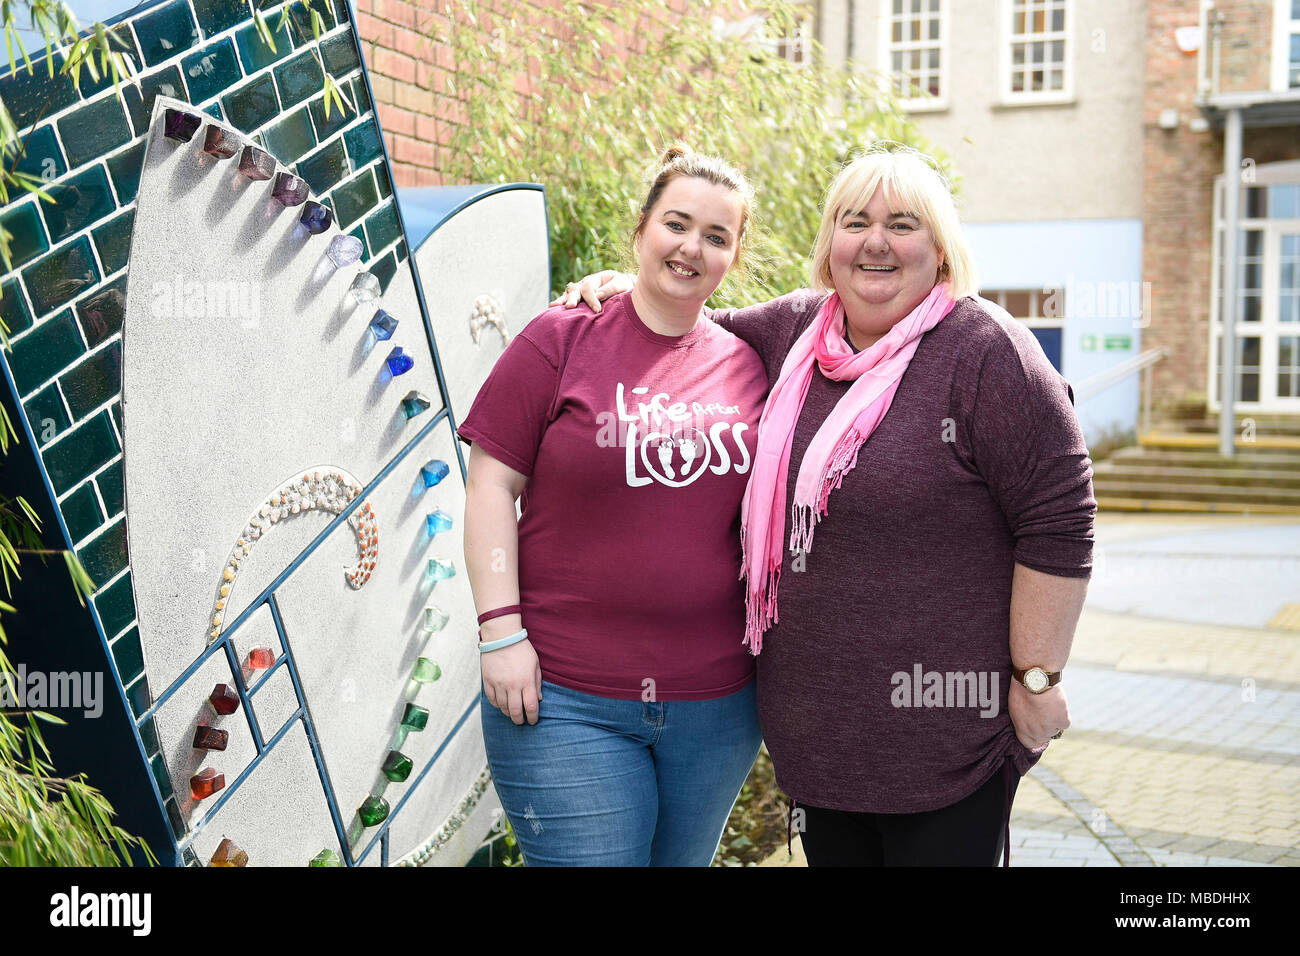 Catherine Cooke and her daughter Julie-Ann Coll (left) from Londonderry, Northern Ireland, who have received an invitation to the wedding of Prince Harry and Meghan Markle at Windsor Castle next month. Stock Photo